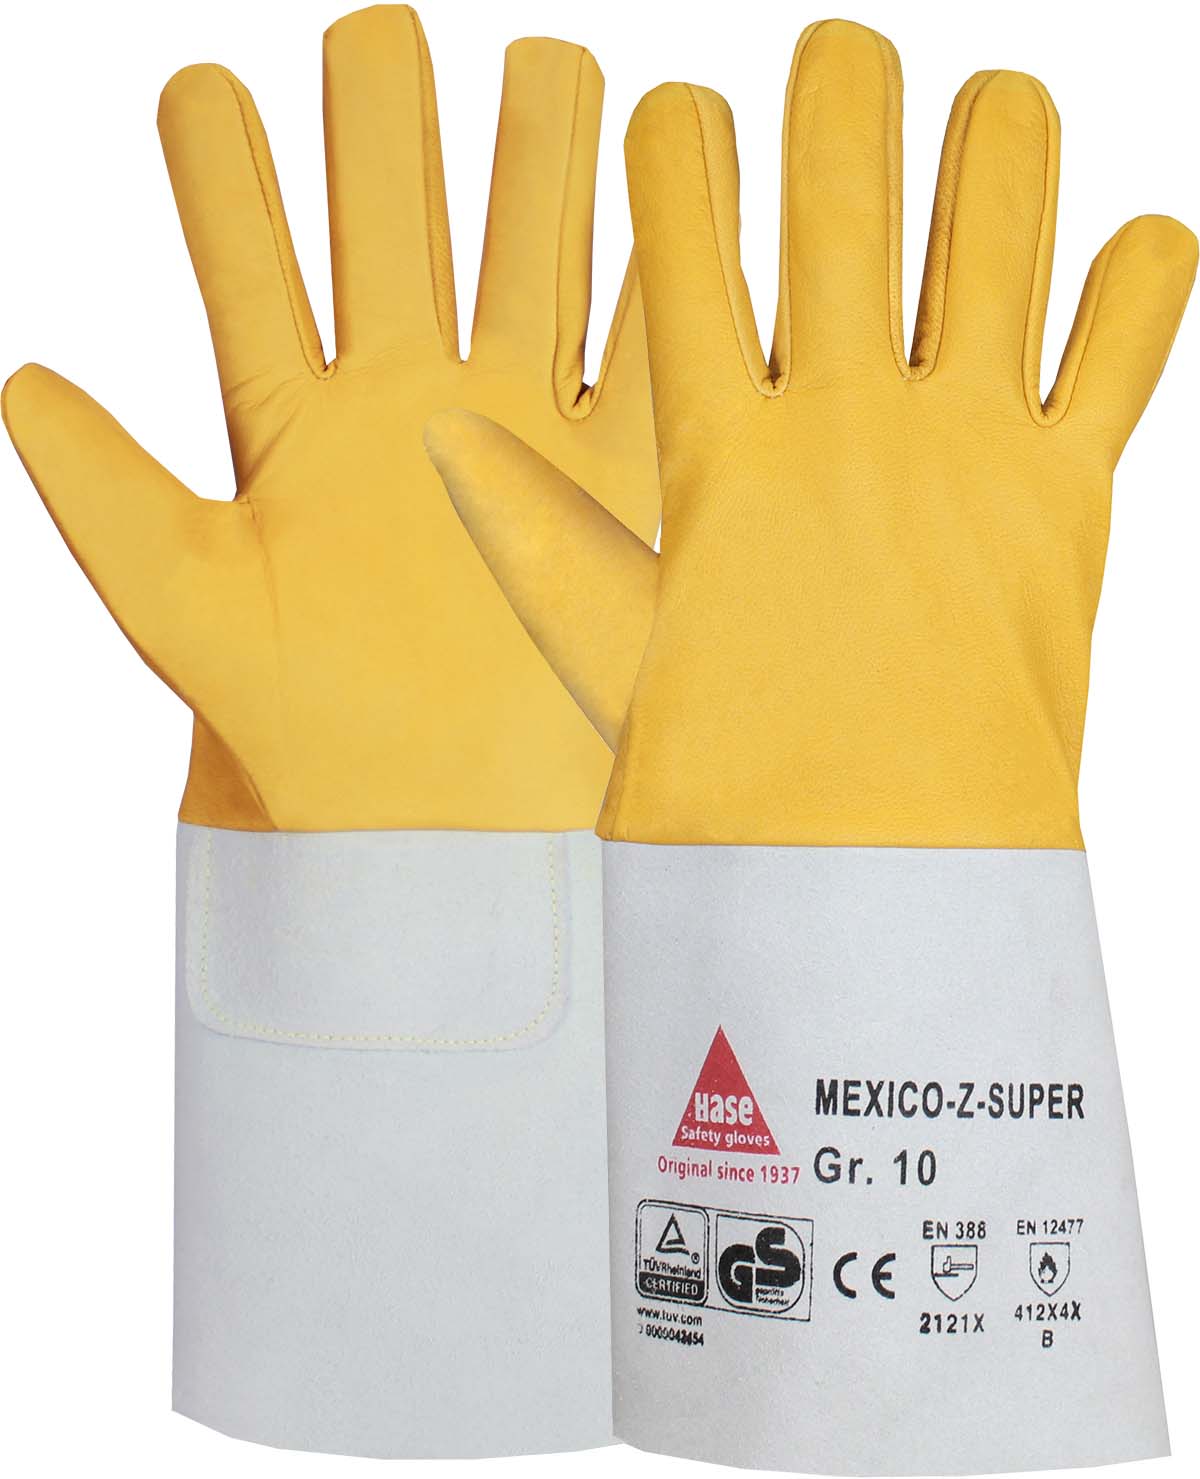 HASE Schweißerhandschuh "Mexico-Z-Super" Nr. 403800, VPE: 10 PA